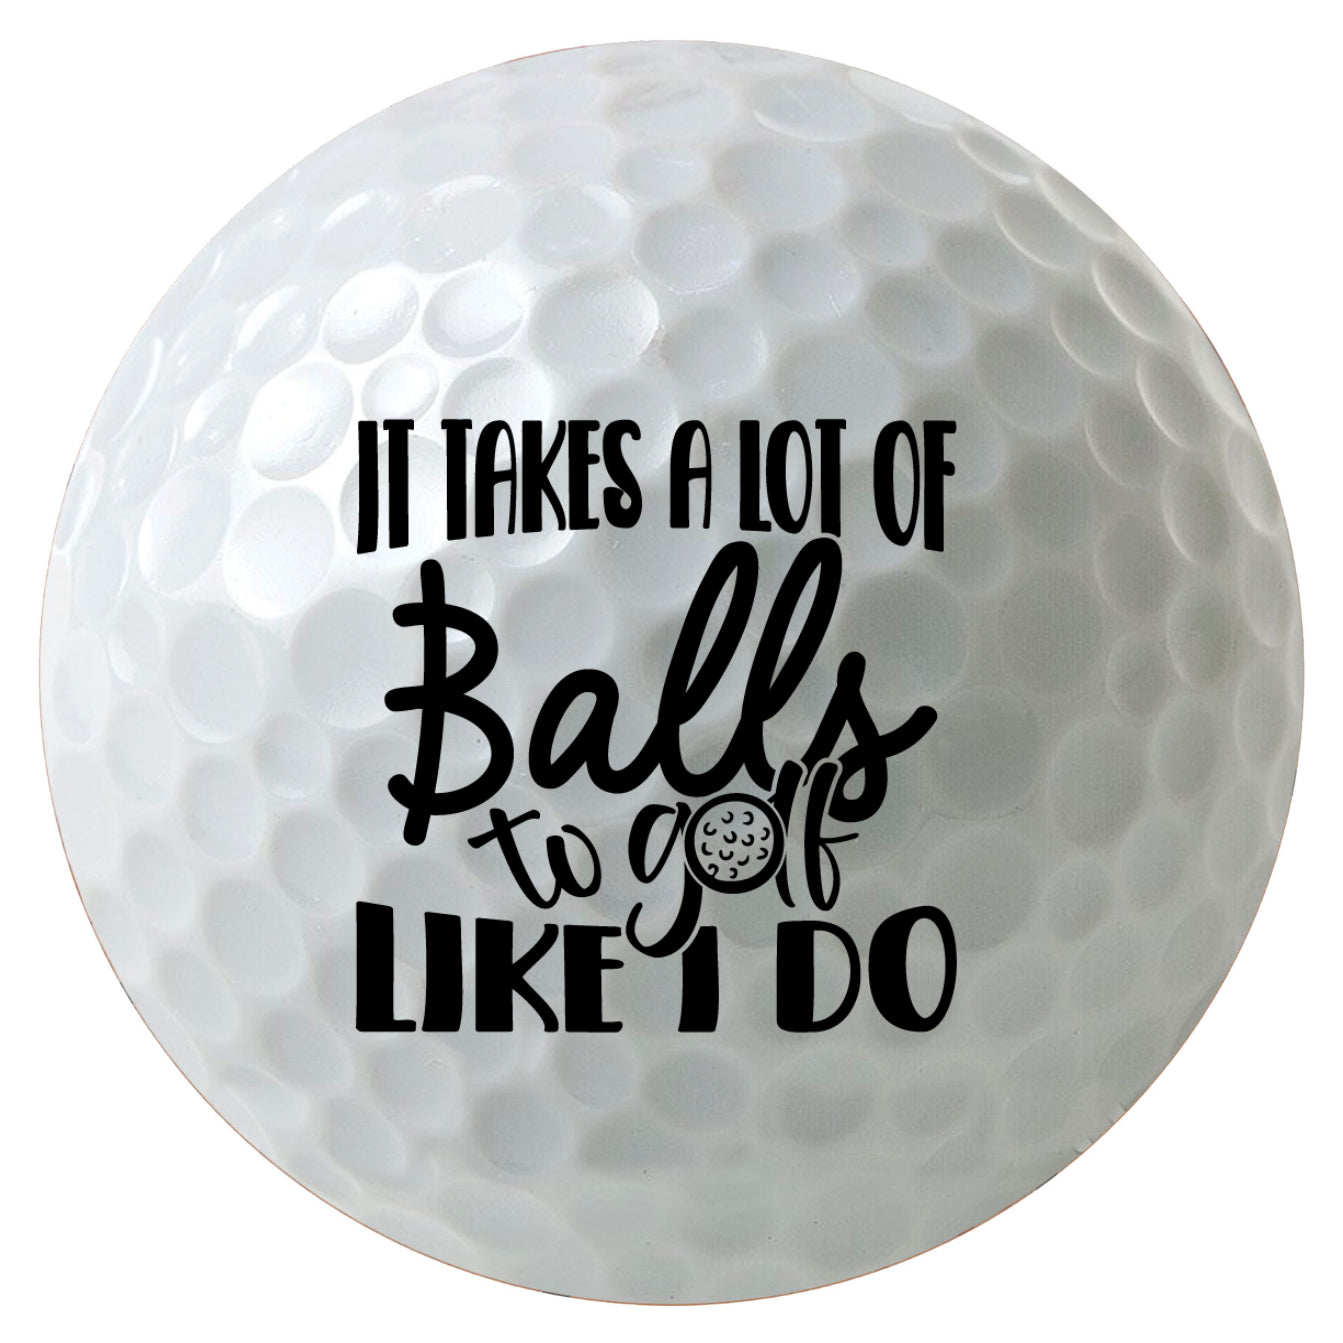 It Takes a Lot of Balls to Golf Like I Do Golf Balls, Time to Par-Tee Golf Balls, 3-Pack Printed White Golf Balls